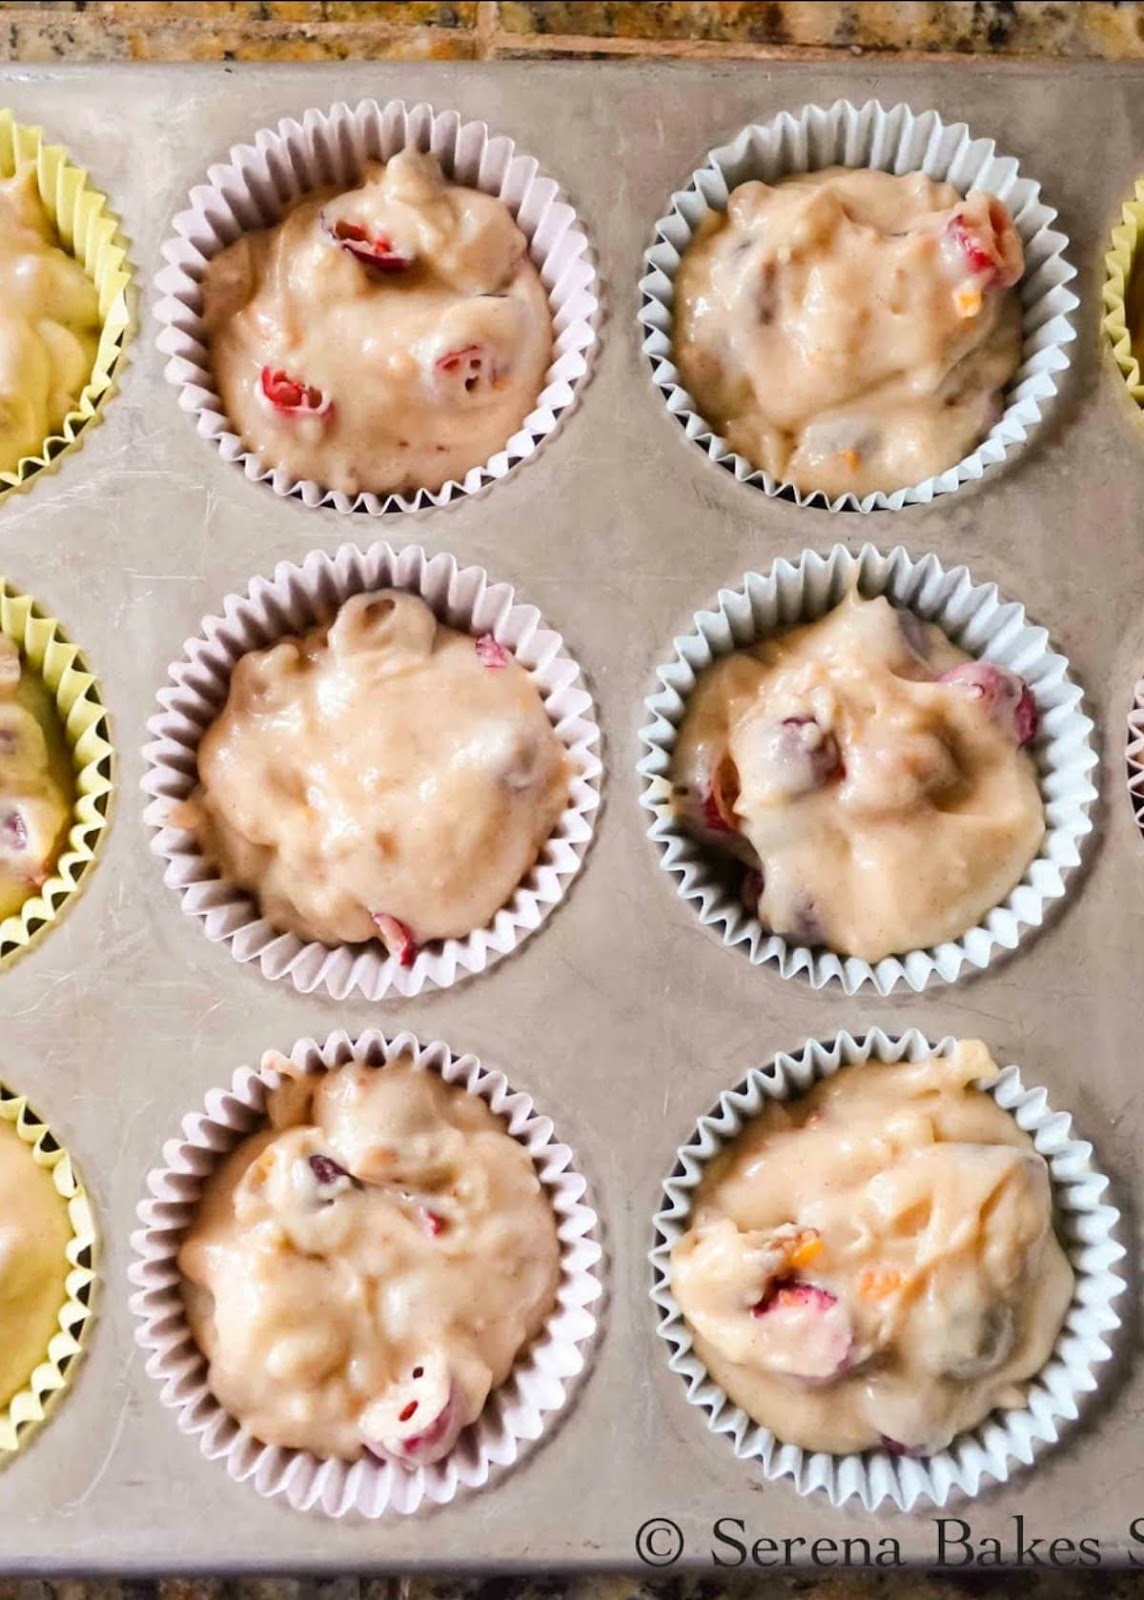 Lined Muffin Tin Filled with Orange Cranberry Muffin Batter from Serena Bakes Simply from Scratch.